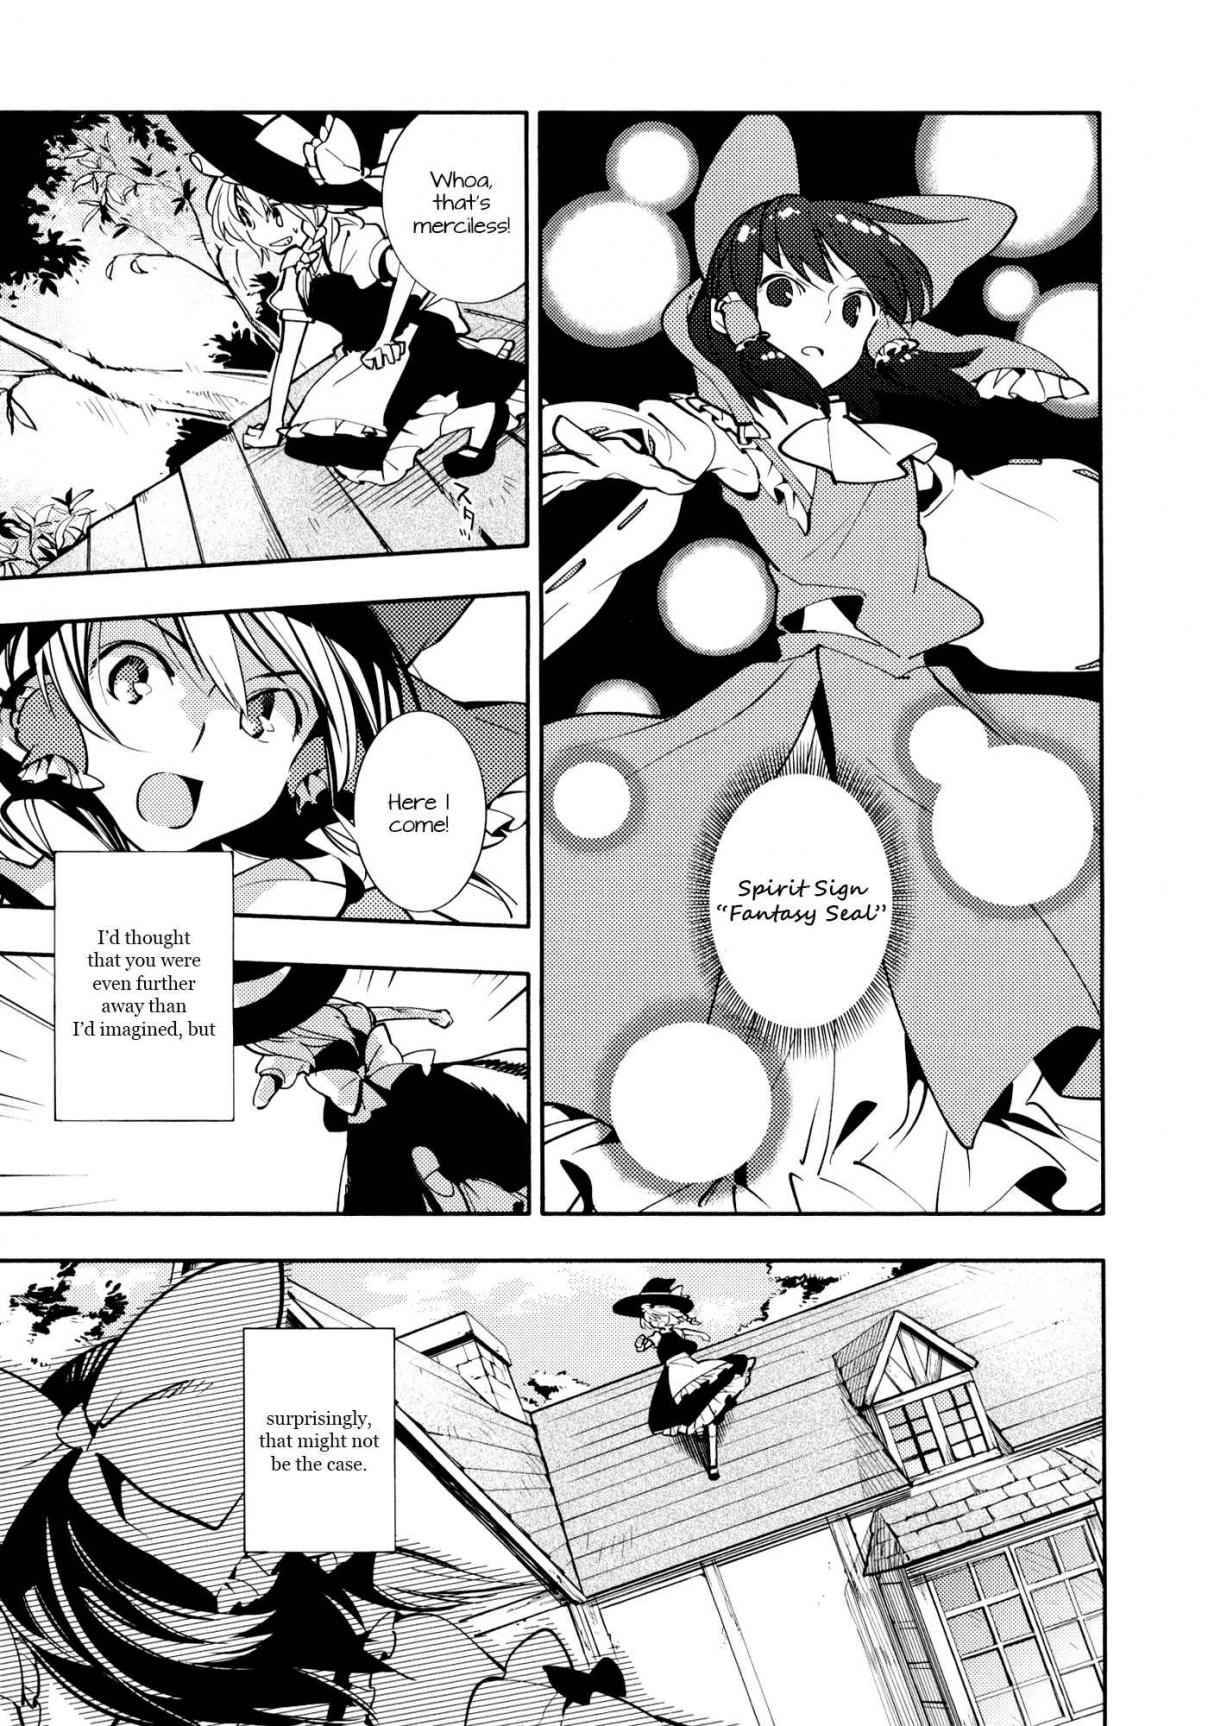 Touhou Project Relation Valley Anthology Vol. 1 (doujinshi) Vol. 1 Ch. 9 Relation Valley Part 2 + postscript